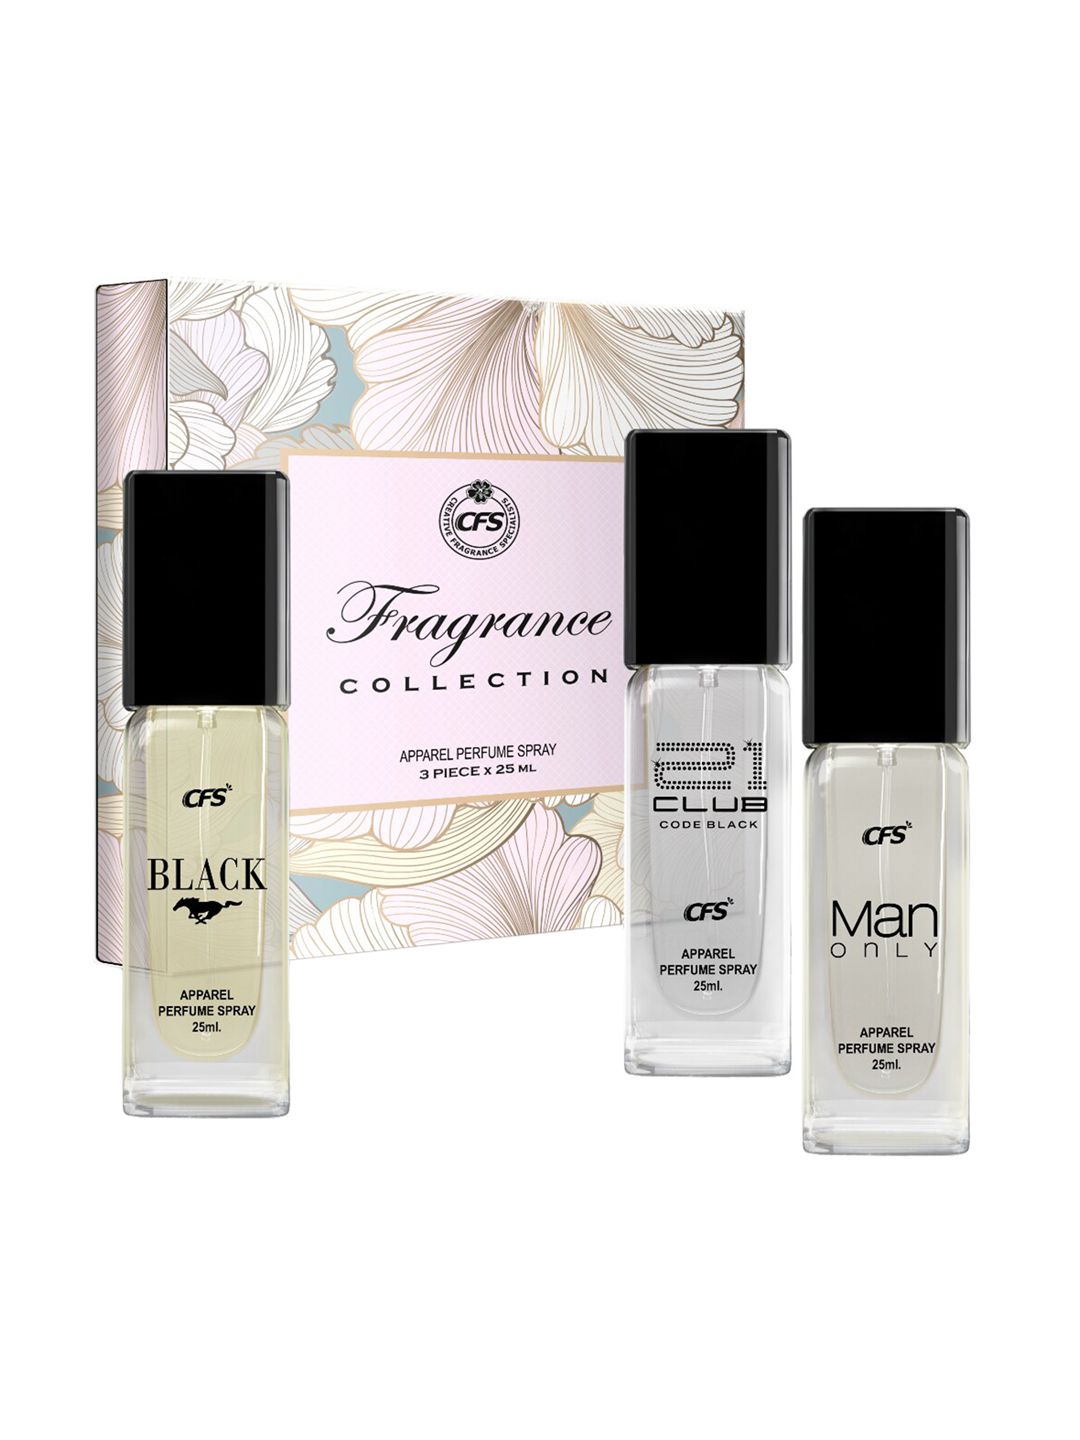 CFS Fragrance Perfume Collection - Black + Man Only Black + 21 Club Code Black - 25ml each Price in India